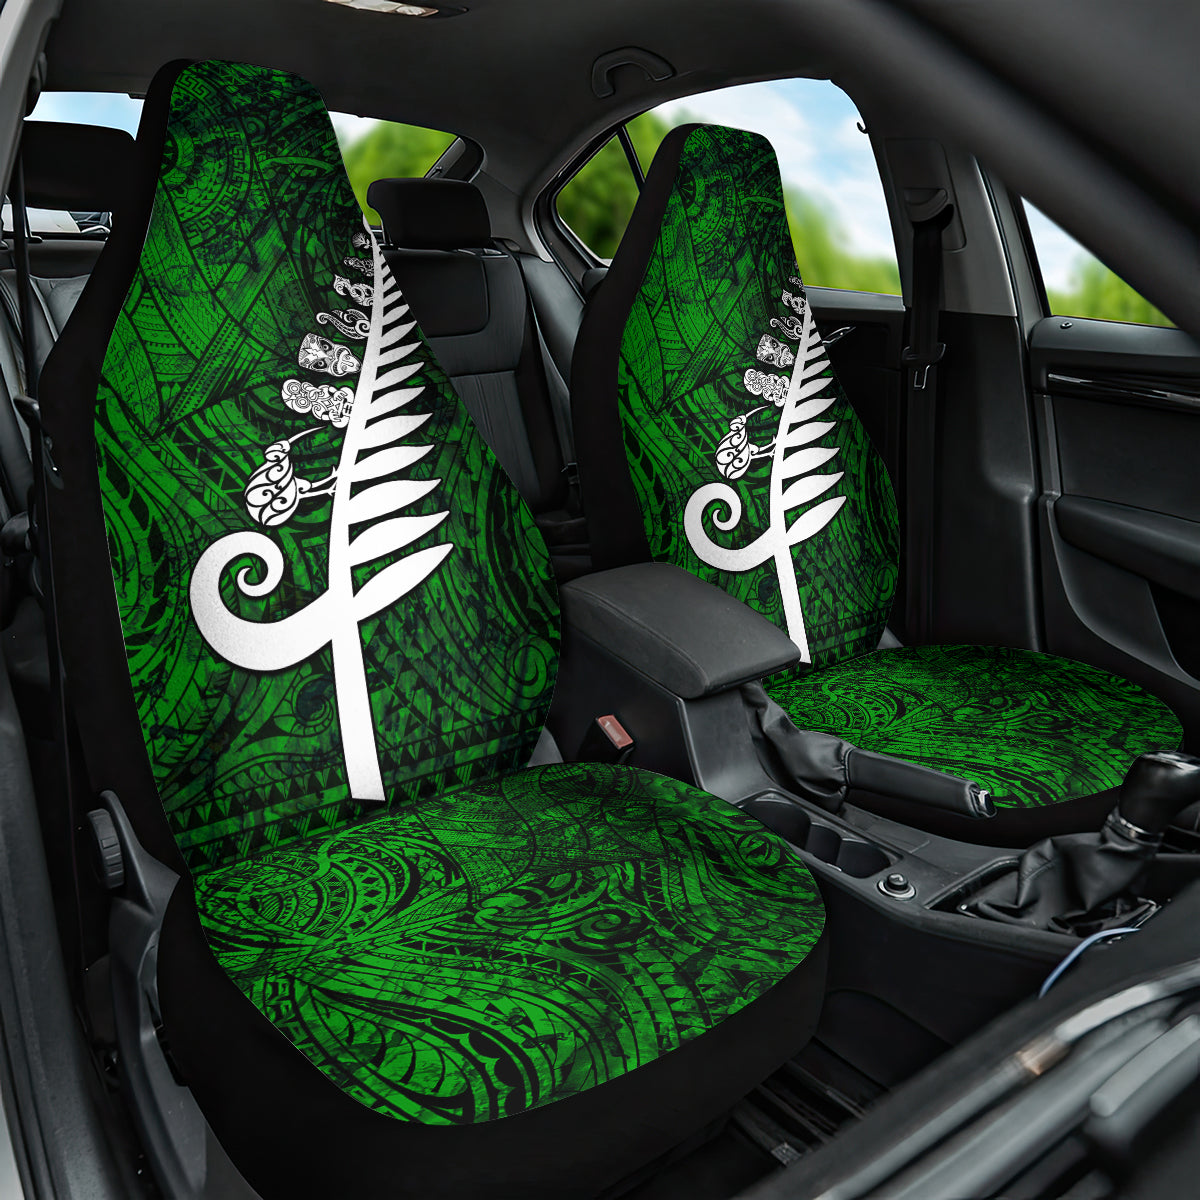 New Zealand Car Seat Cover Silver Fern and Maori Symbols Papua Shell Green Style LT03 One Size Green - Polynesian Pride